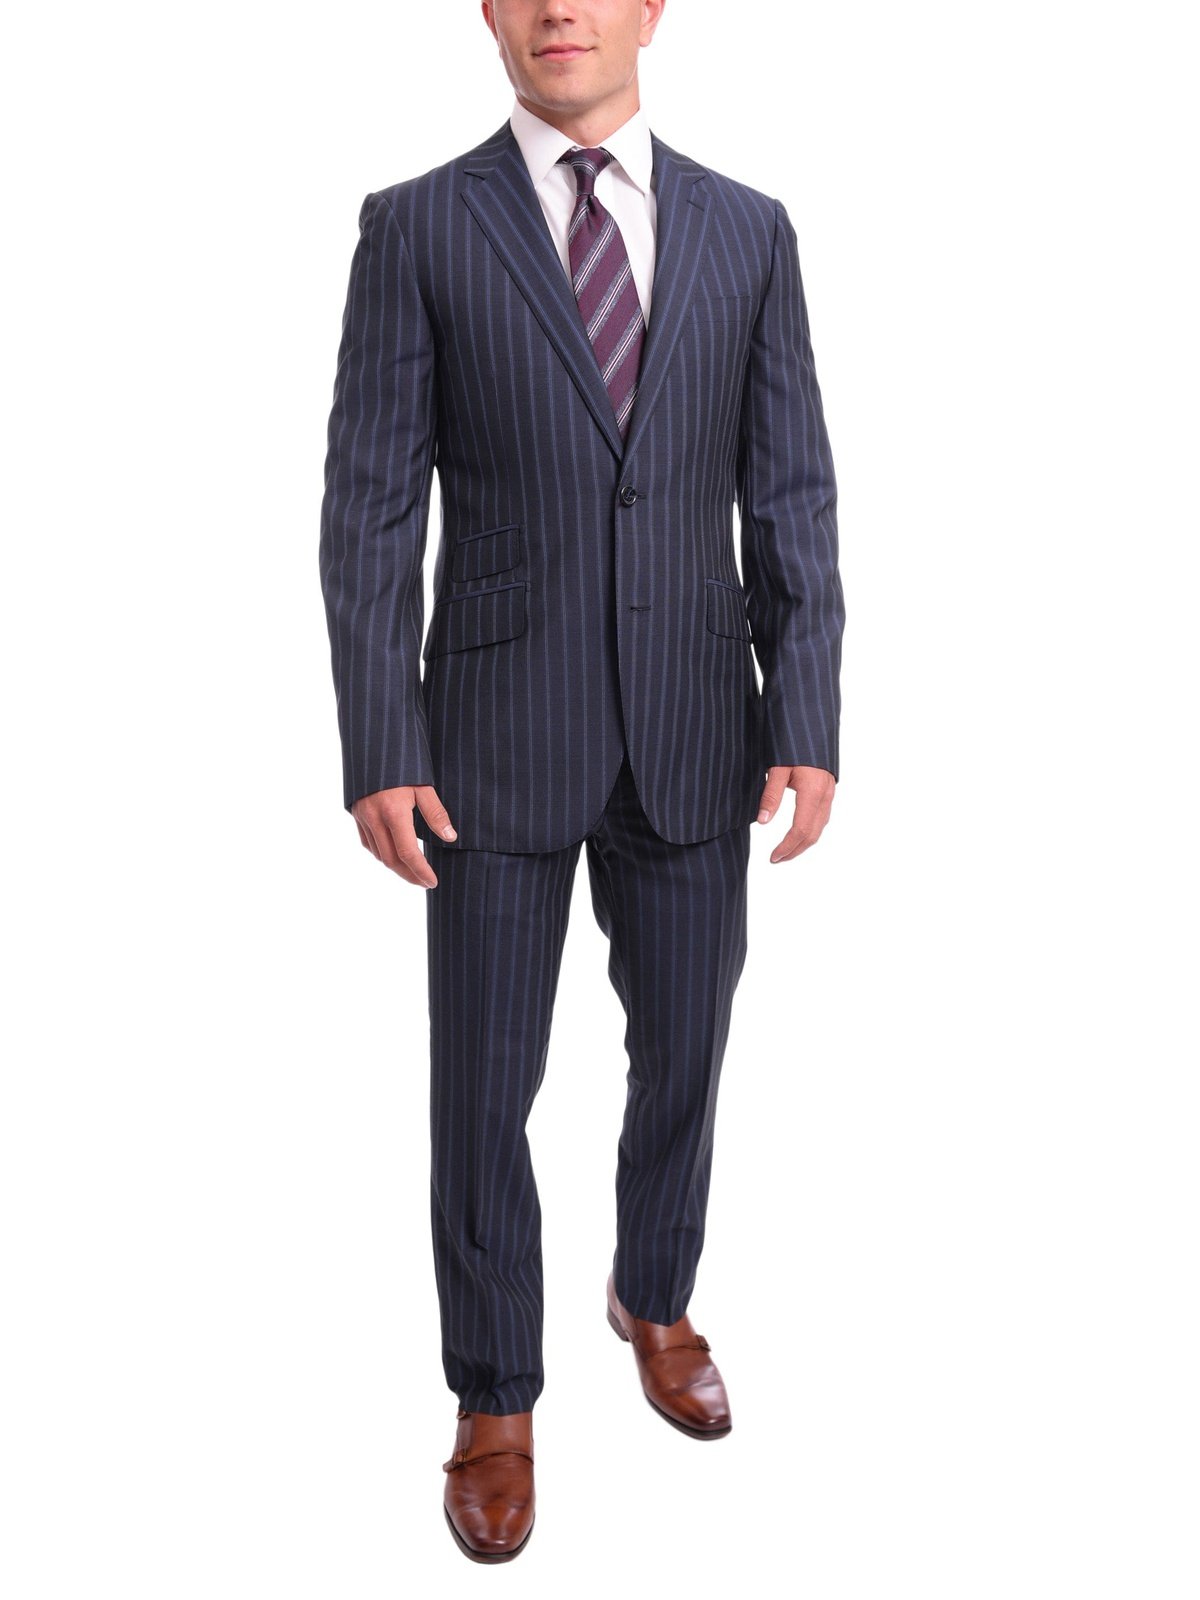 Napoli TWO PIECE SUITS Napoli Slim Fit Navy Blue Pinstripe Two Button Half Canvassed Wool Suit